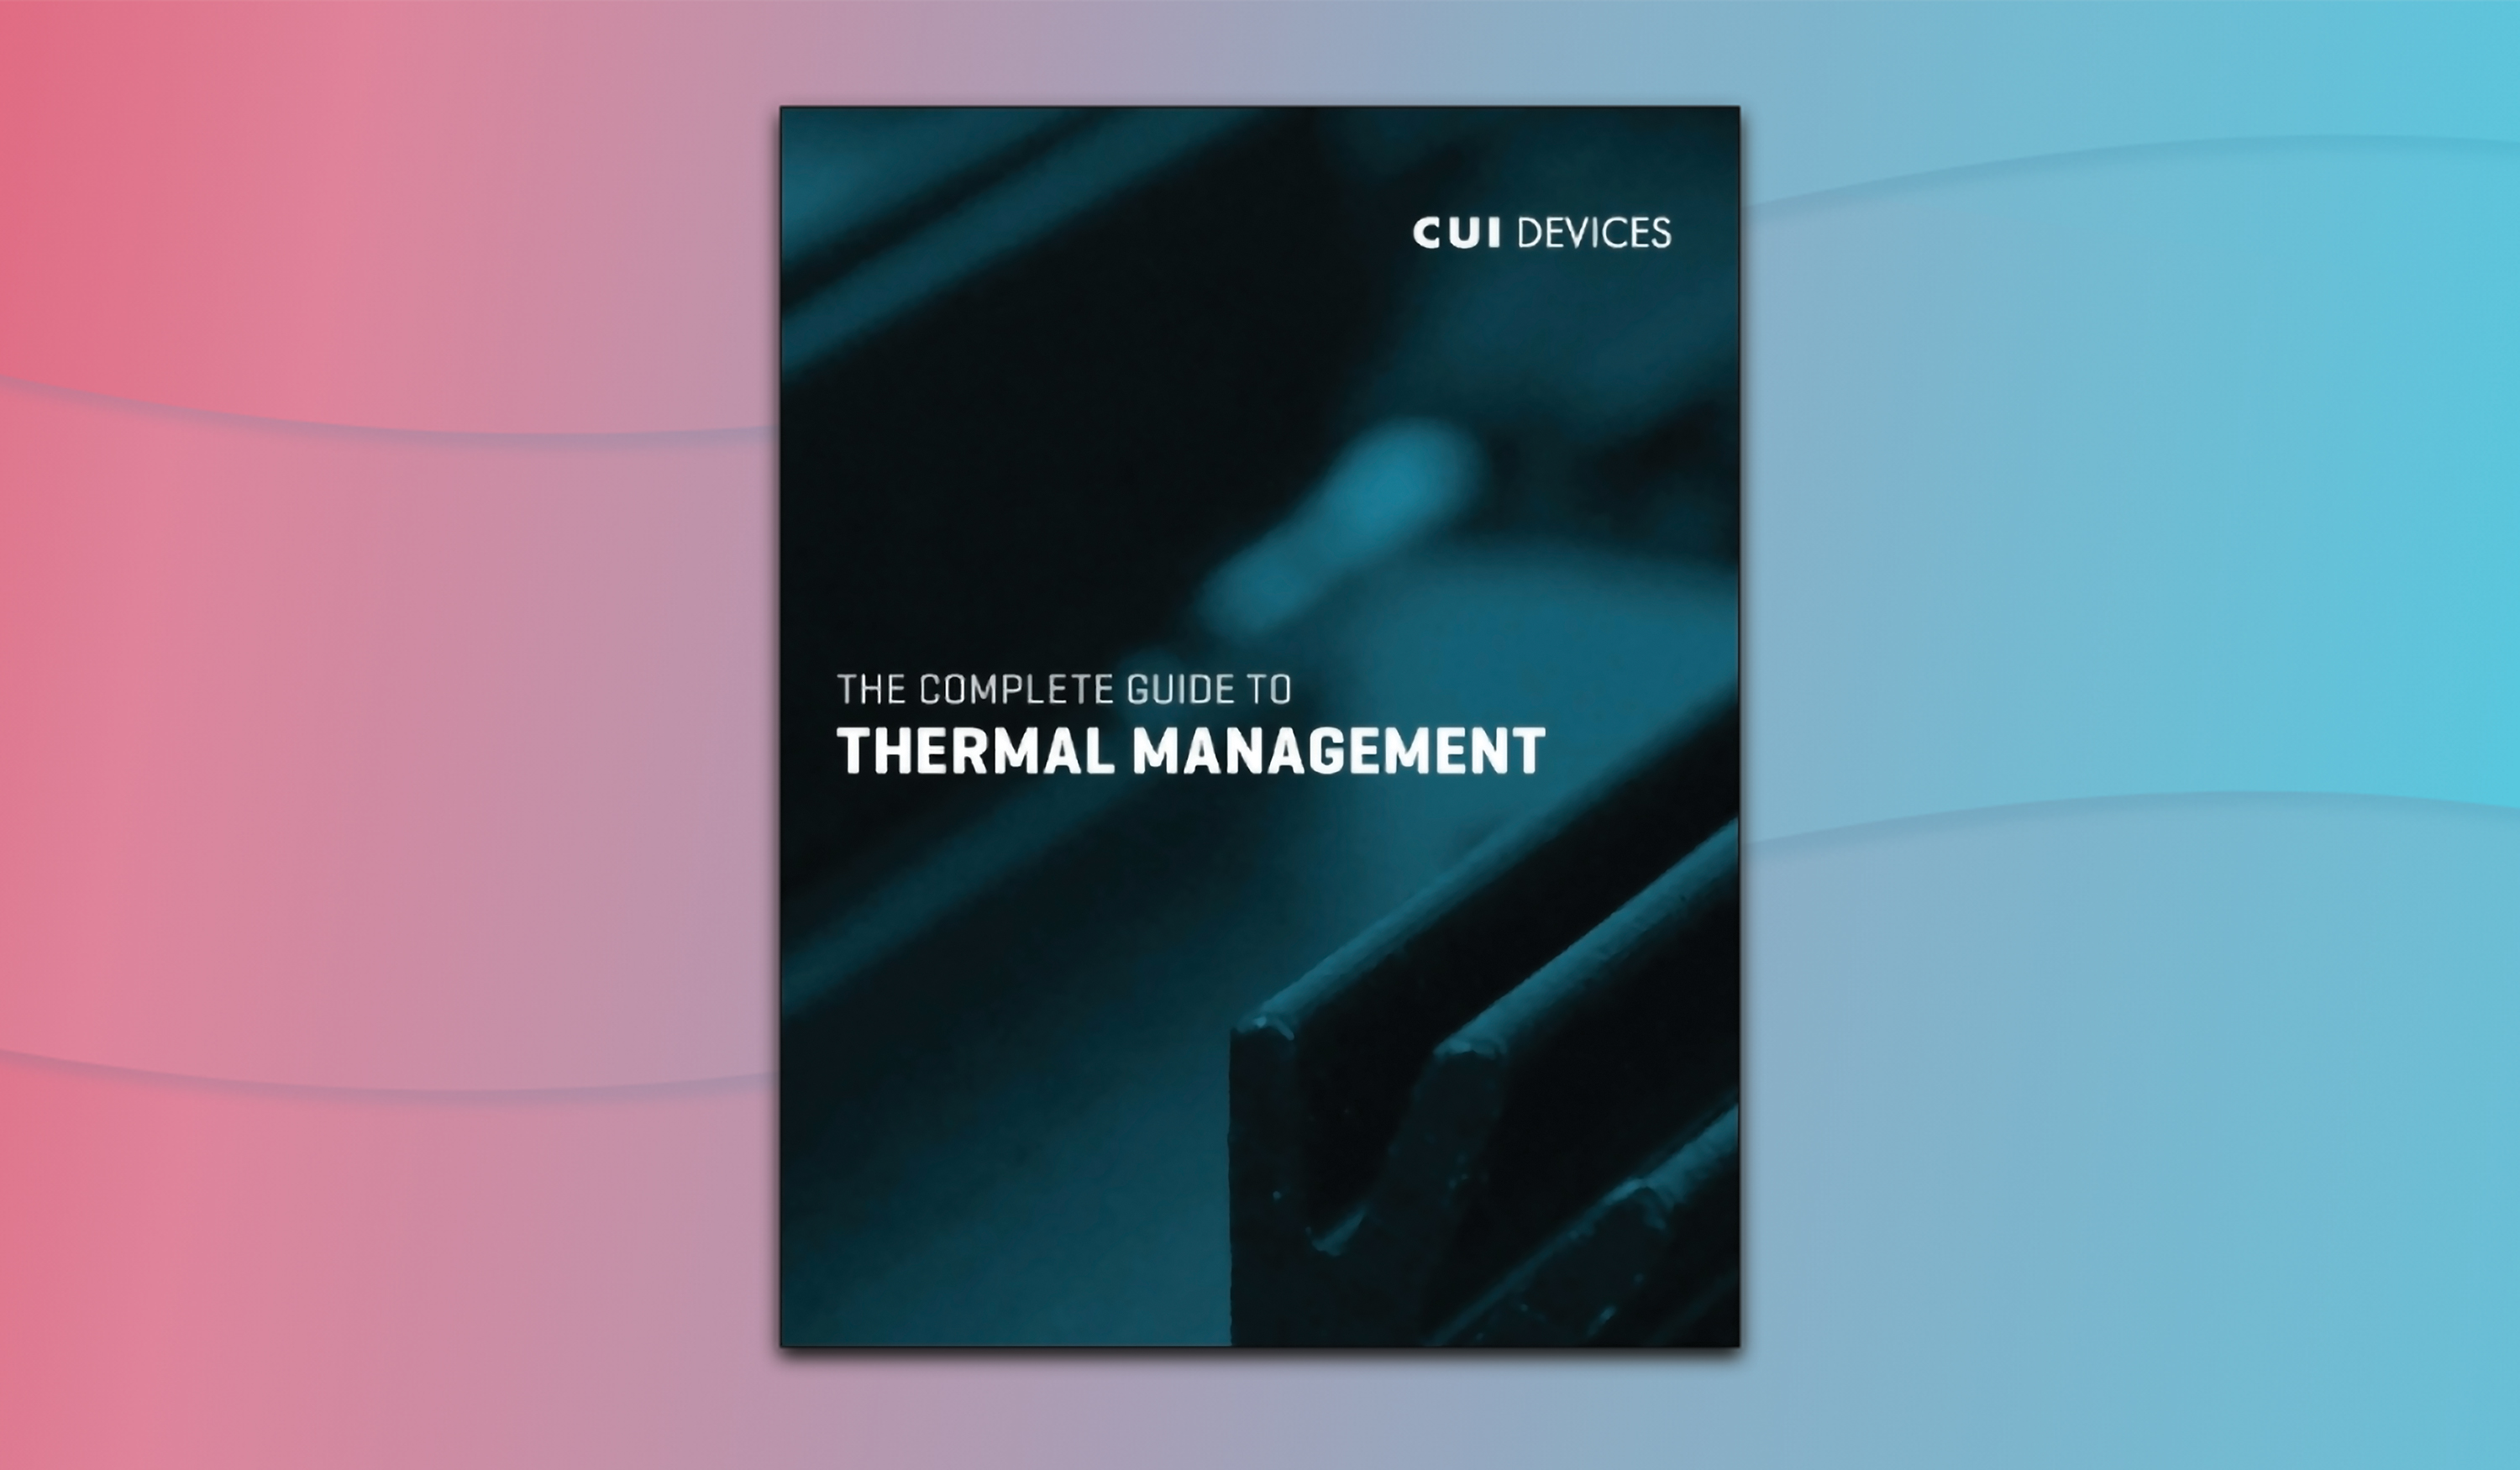 eBook Offers a Complete Guide to Thermal Management